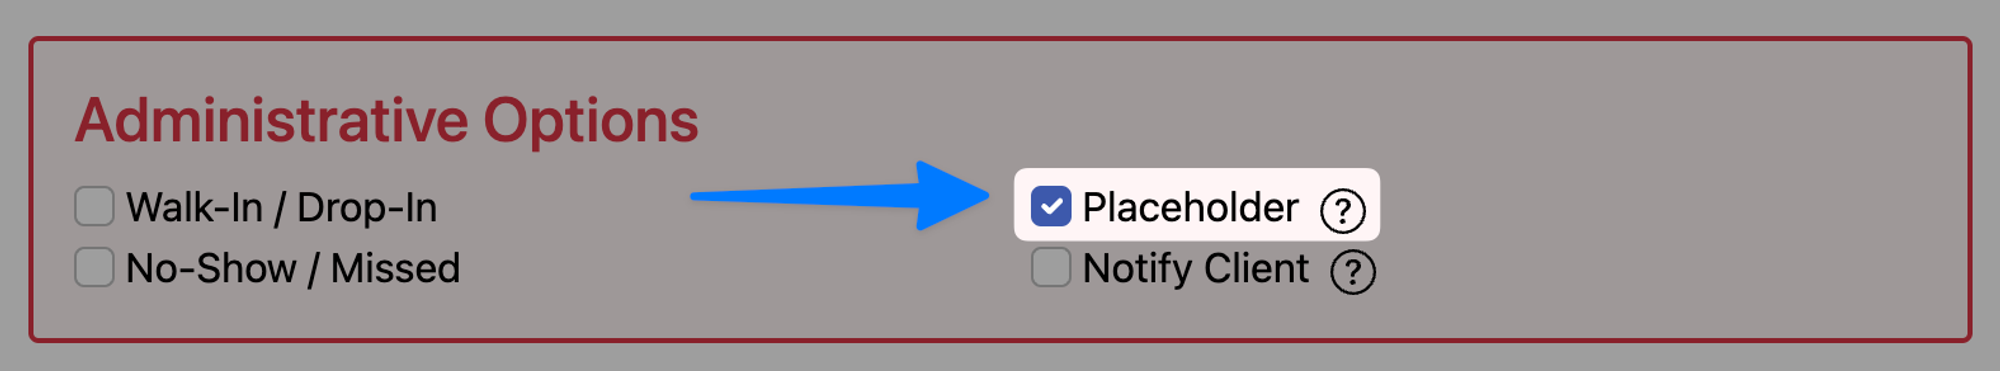 Select the Placeholder box to the left of the word “Placeholder” to proactively mark block-off time for student leader work.